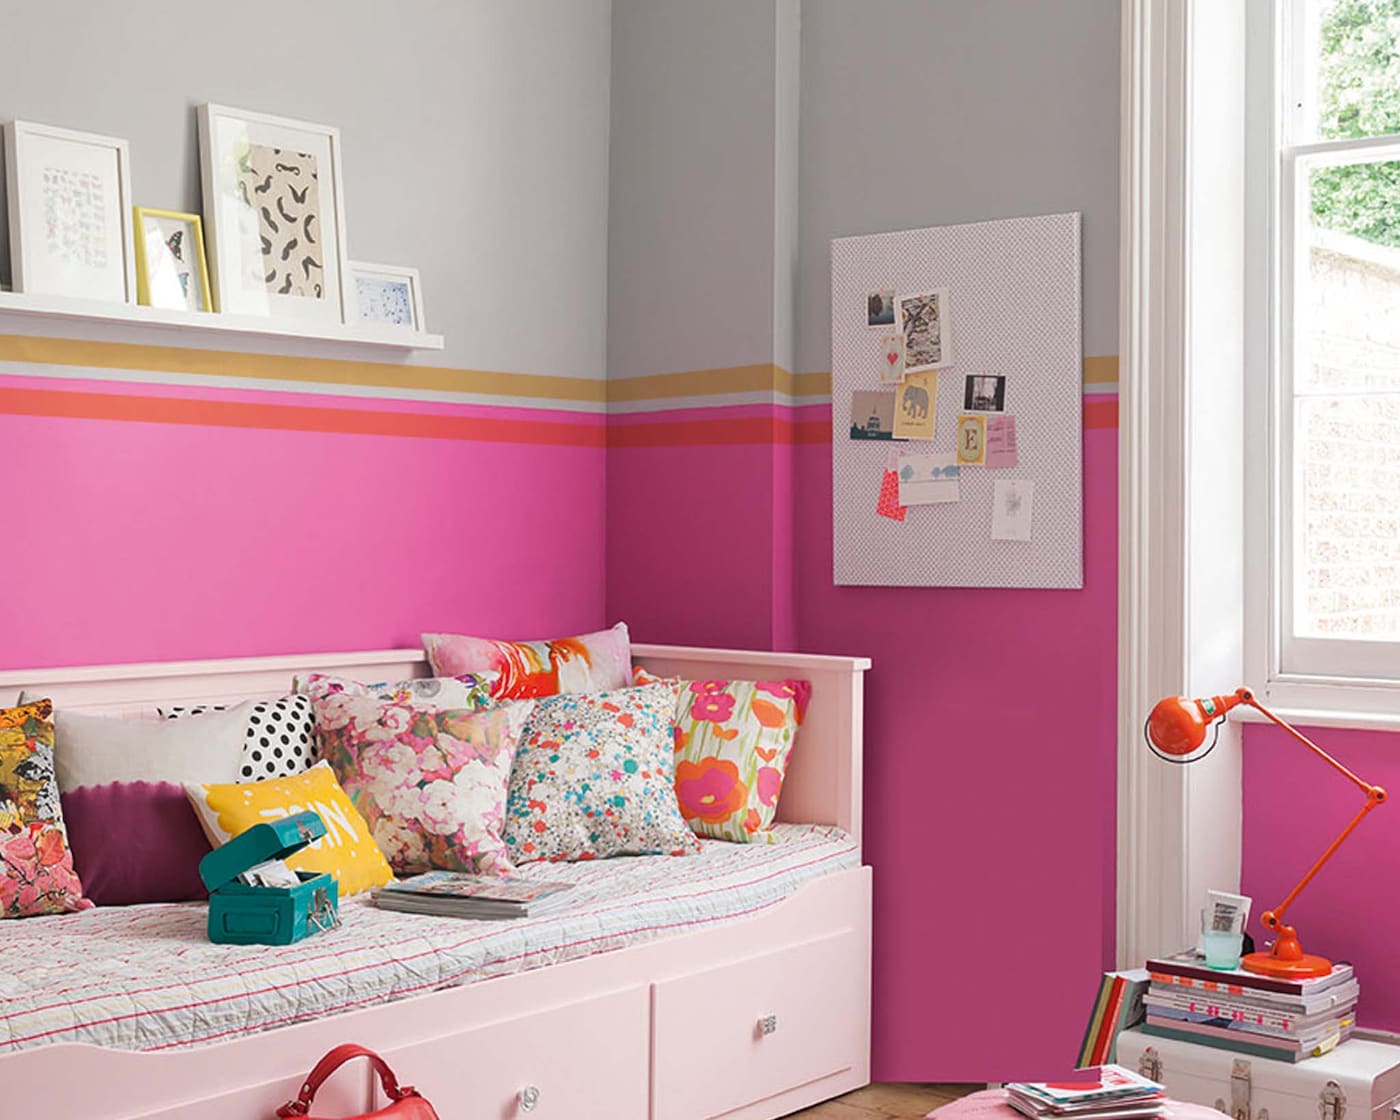 4 ways to use stripes in your child’s bedroom | Dulux Singapore